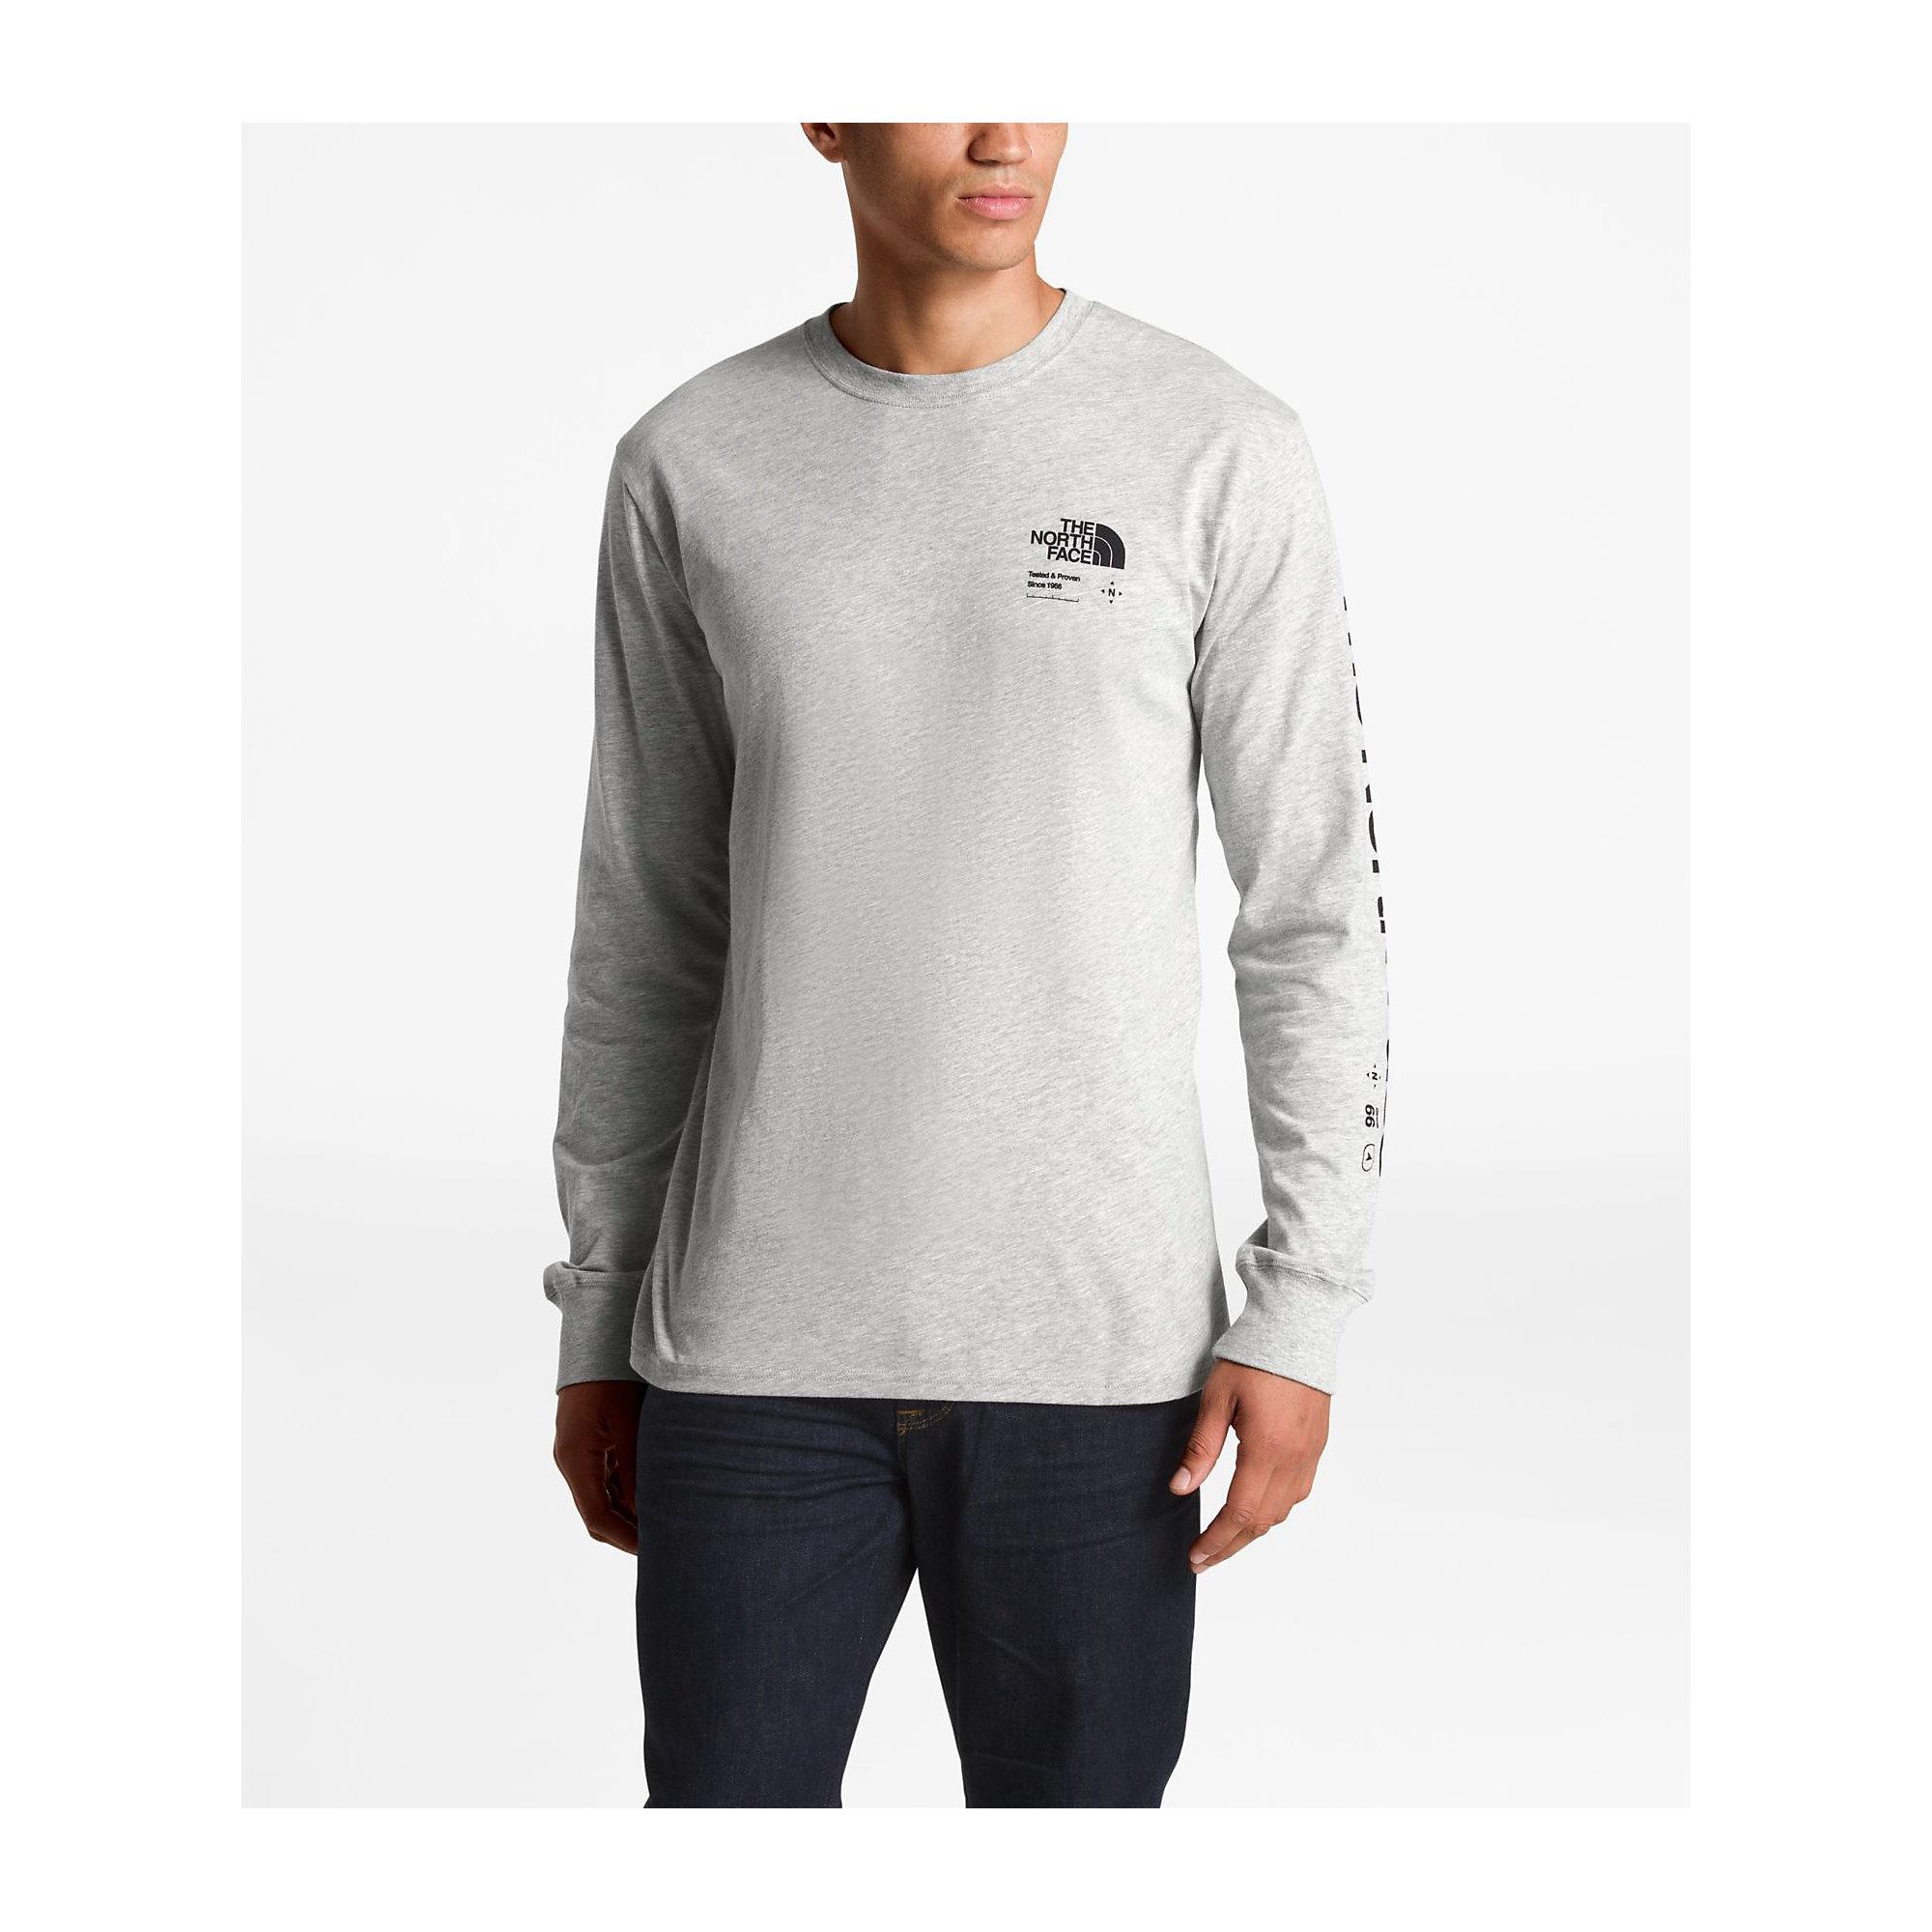 north face half dome long sleeve